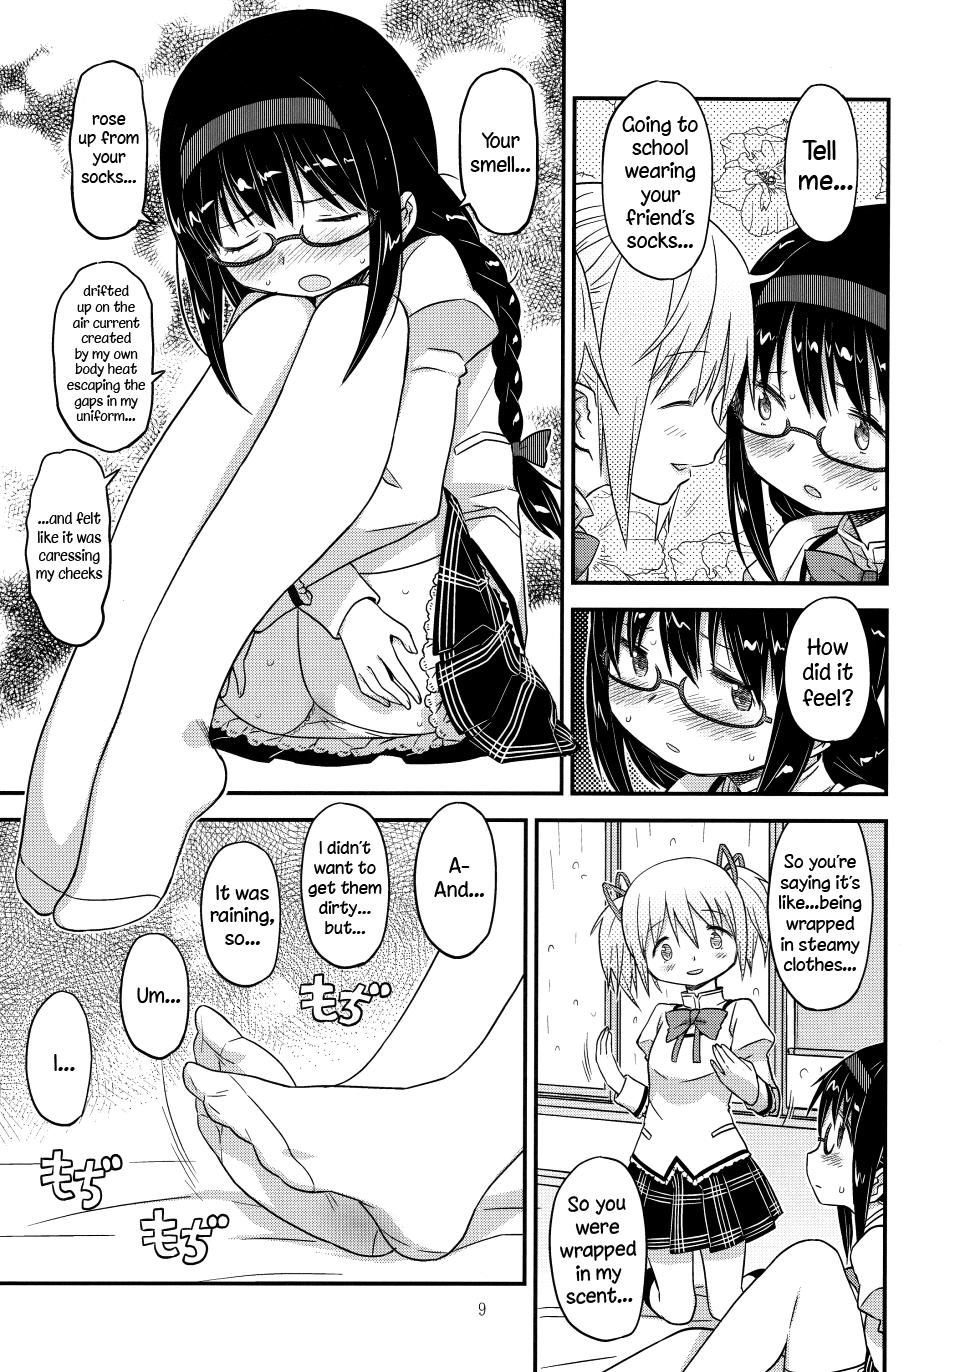 Group Sex Its Time to Fall? - Puella magi madoka magica Online - Page 8